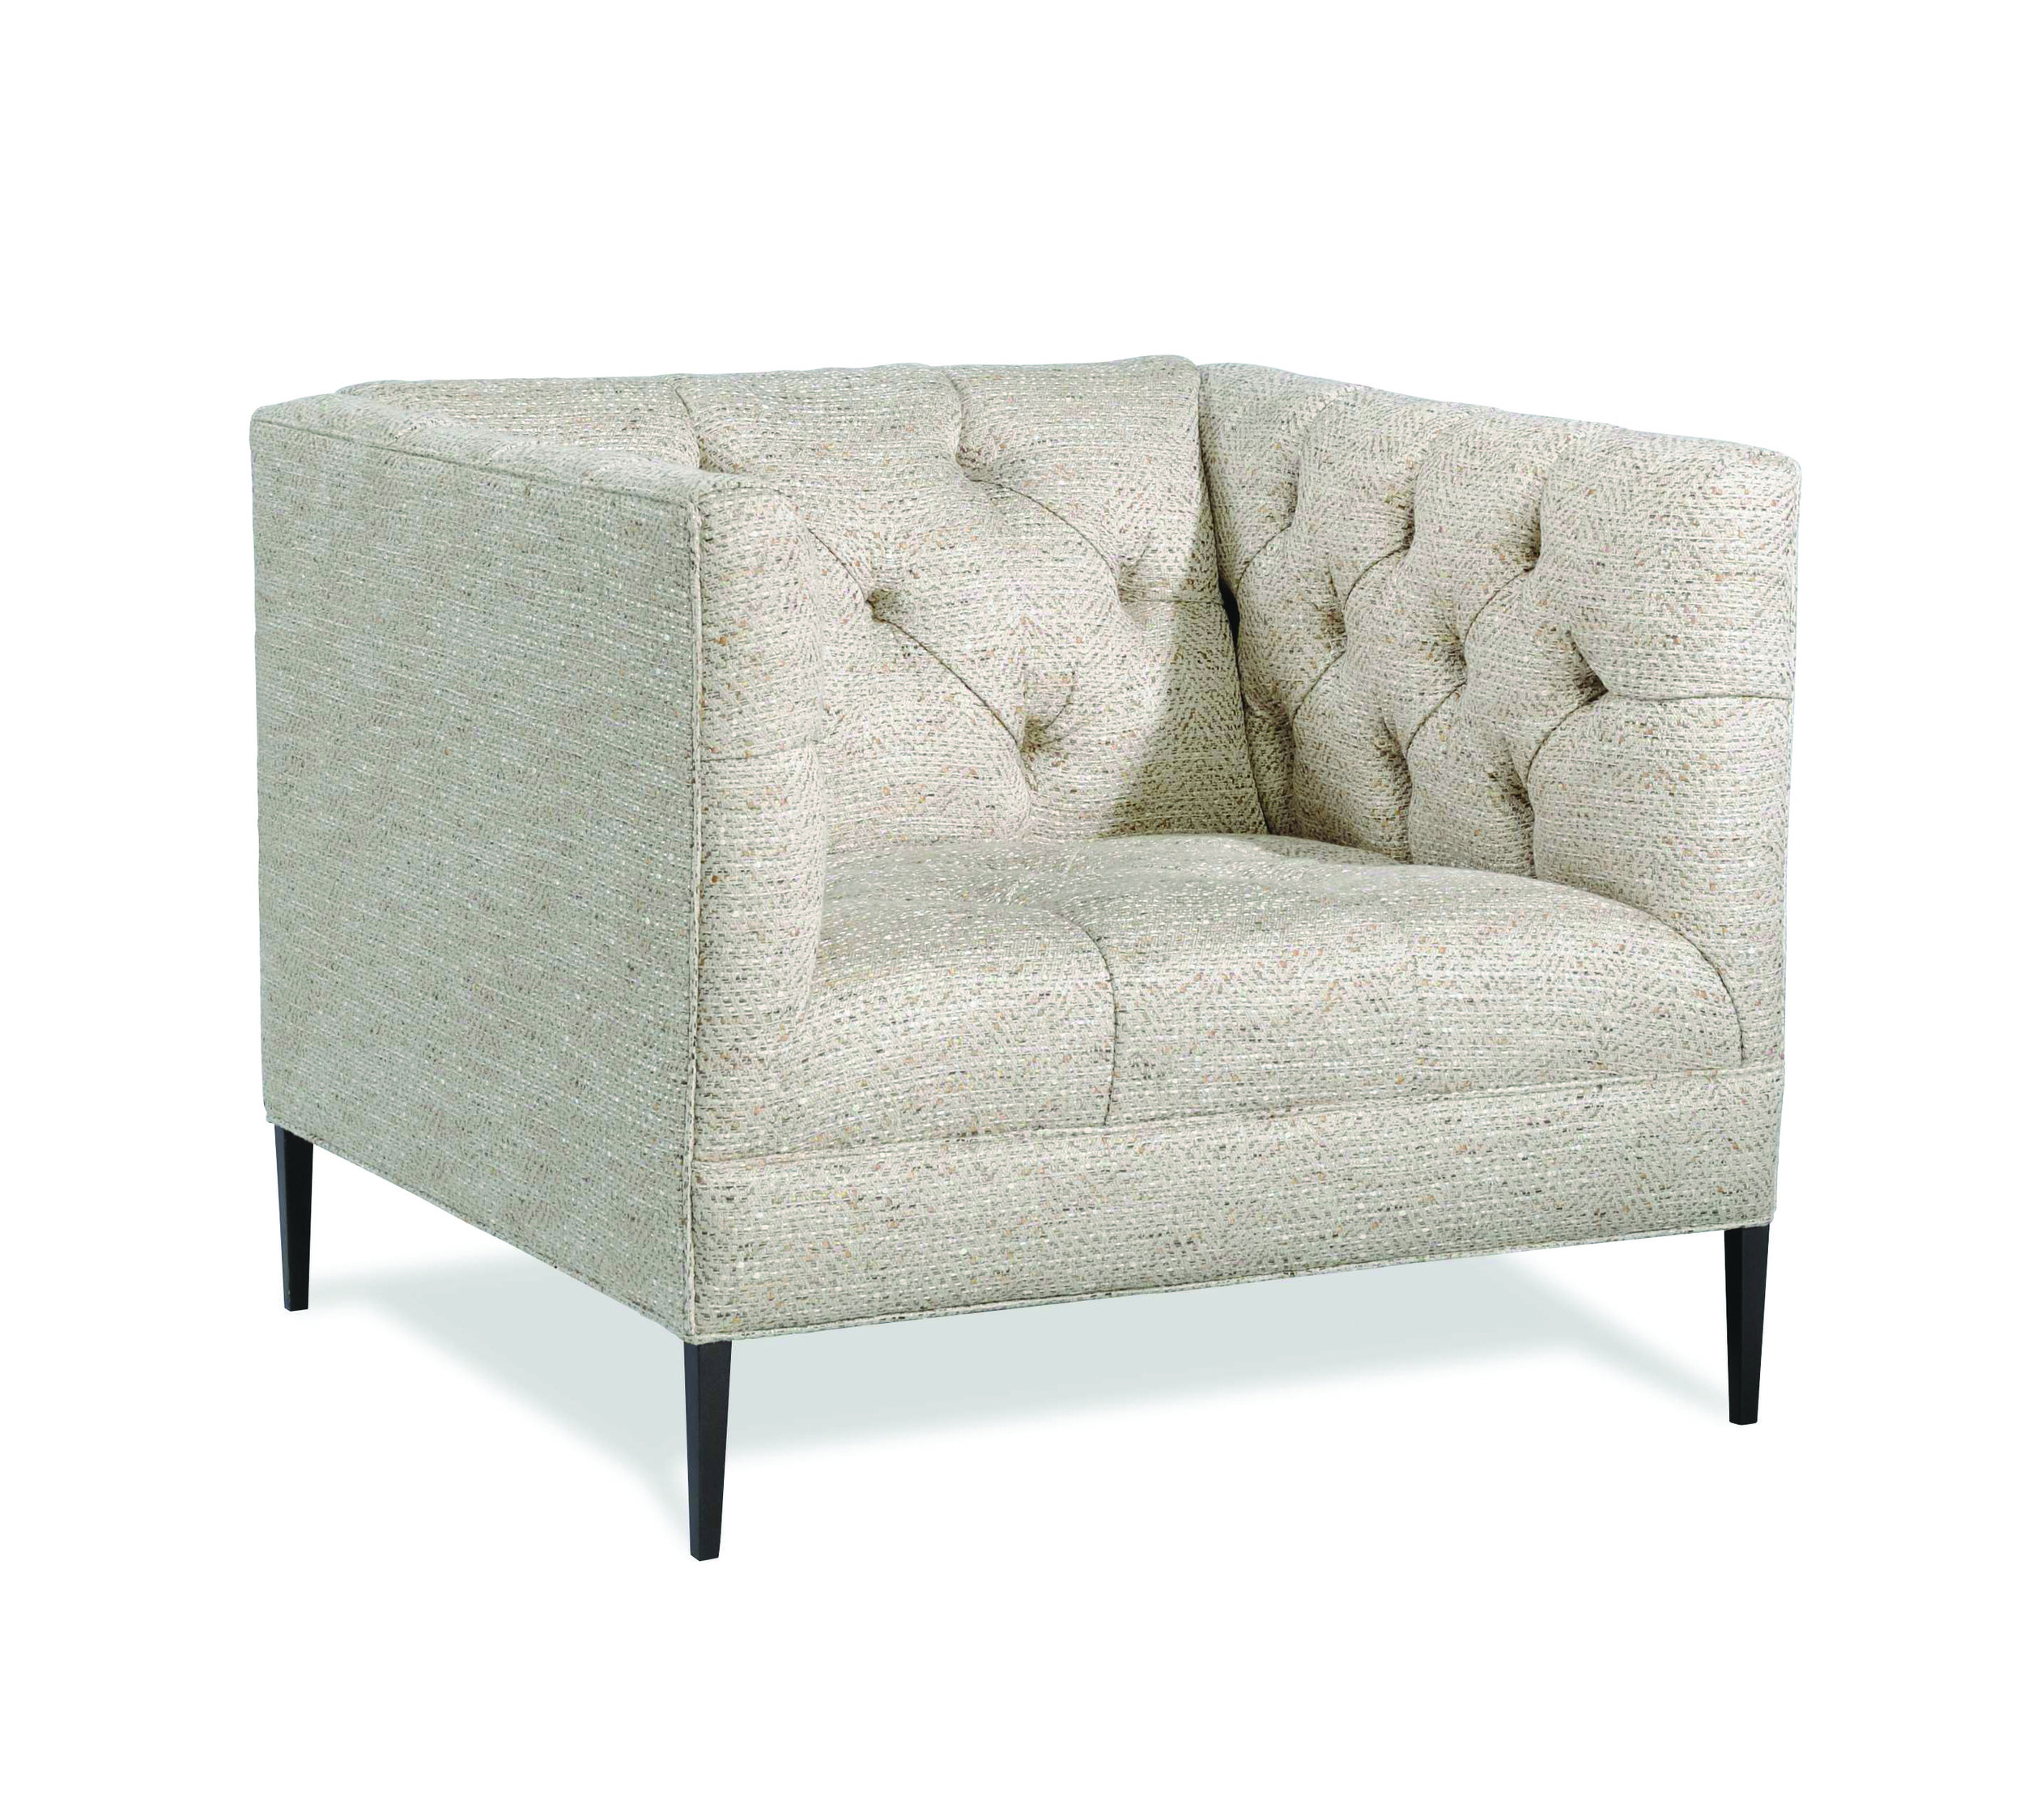  The warmer grey tone of this tufted Mid-century modern chair pairs well with the dark wood legs and is an example of how a warmer grey works perfectly with wood. 